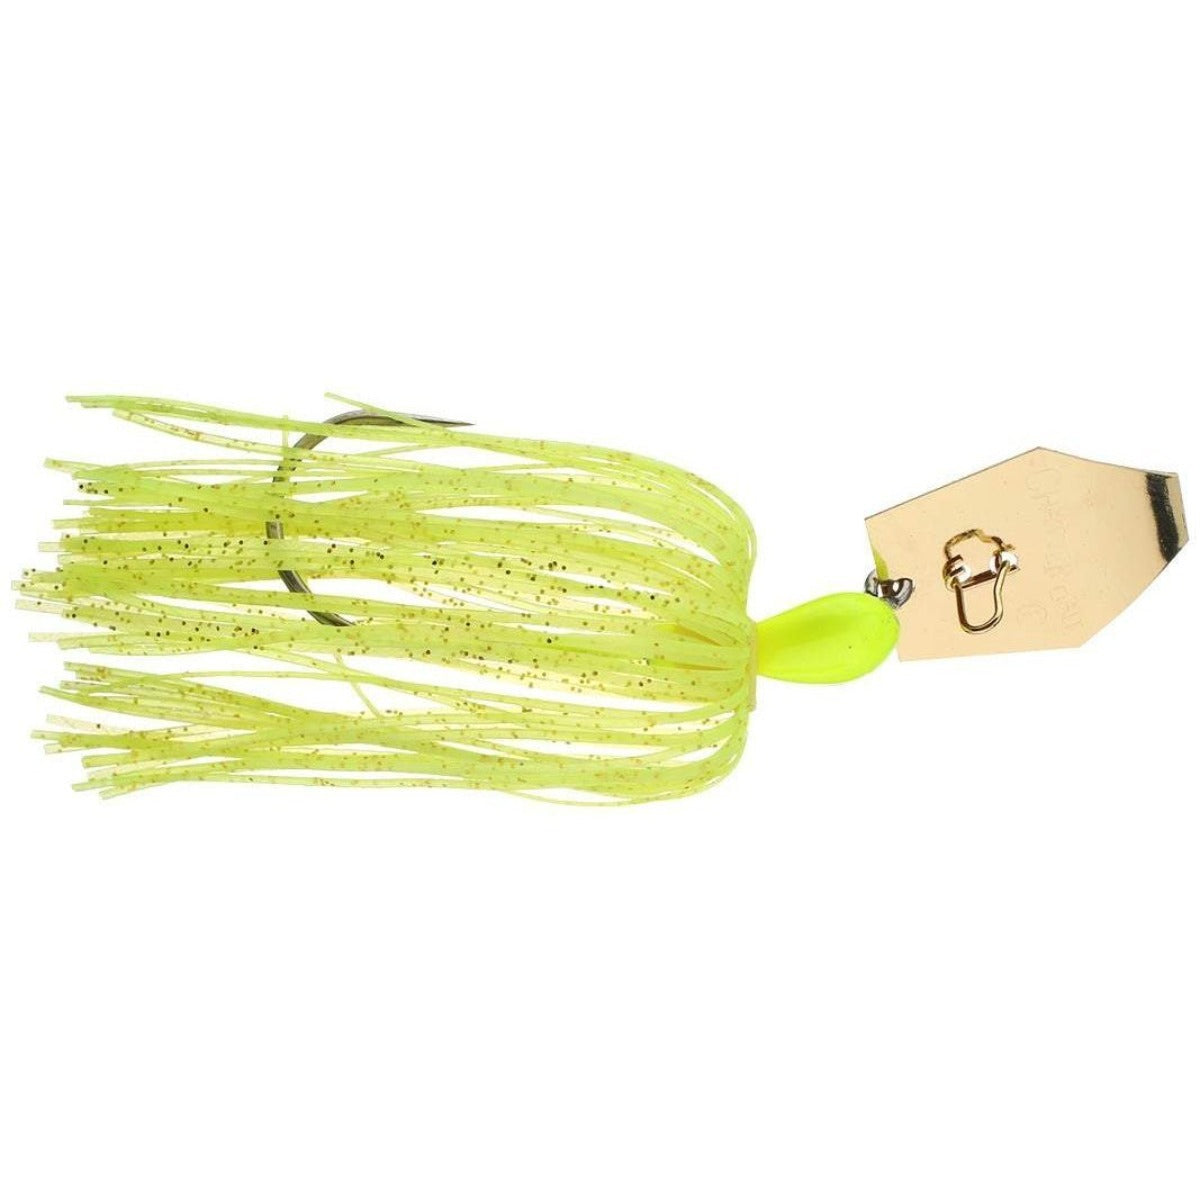 Zman Original Chatterbait – Wind Rose North Ltd. Outfitters